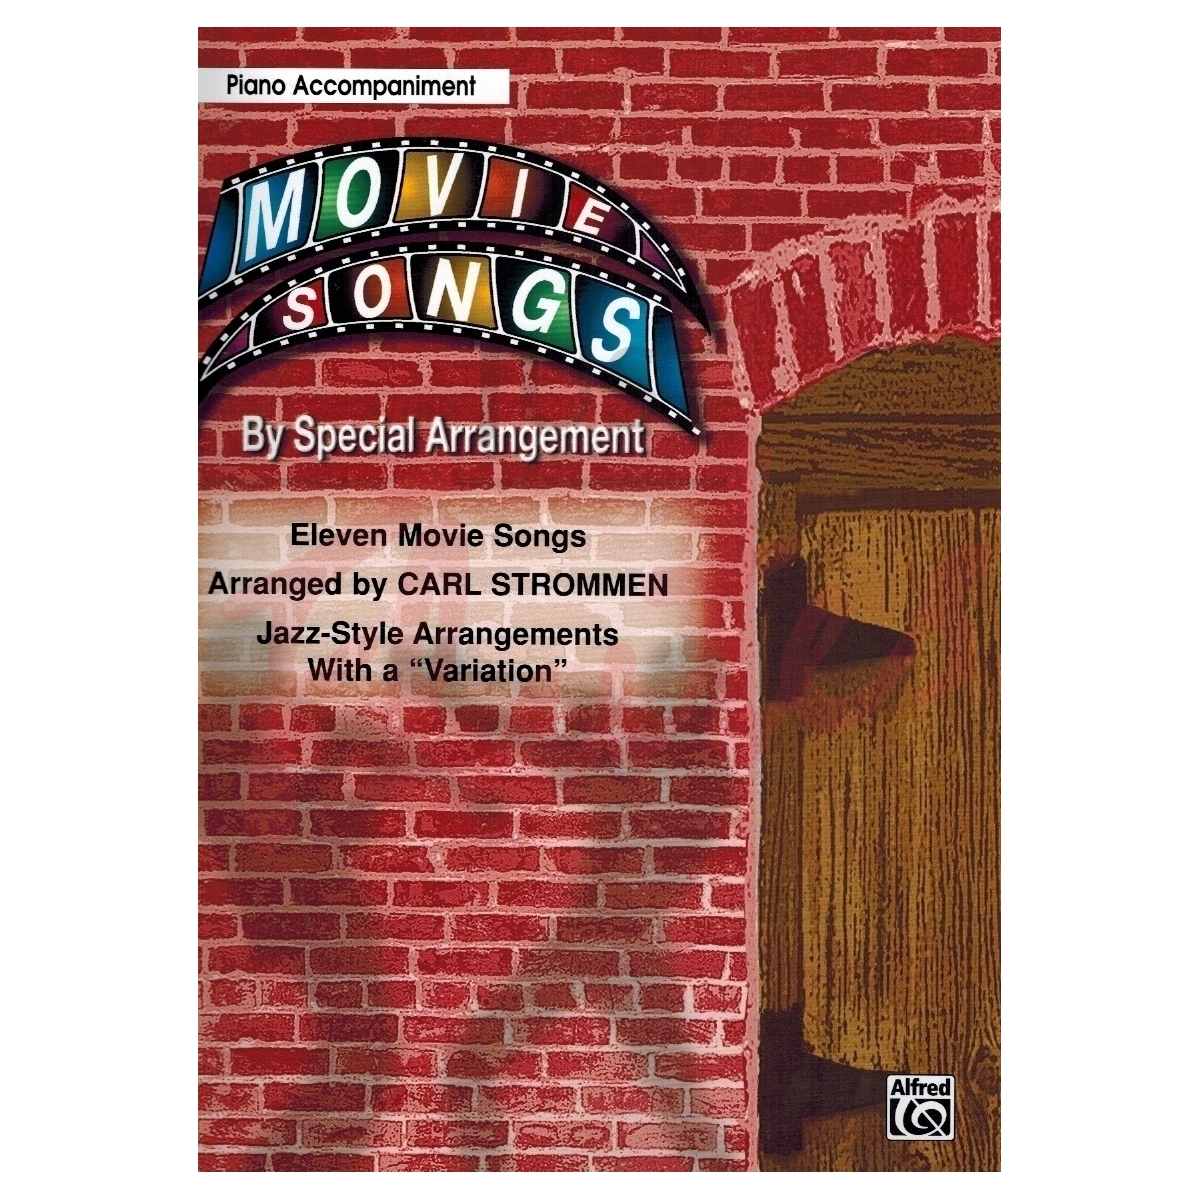 Movie Songs by Special Arrangement [Piano Accompaniment Book]